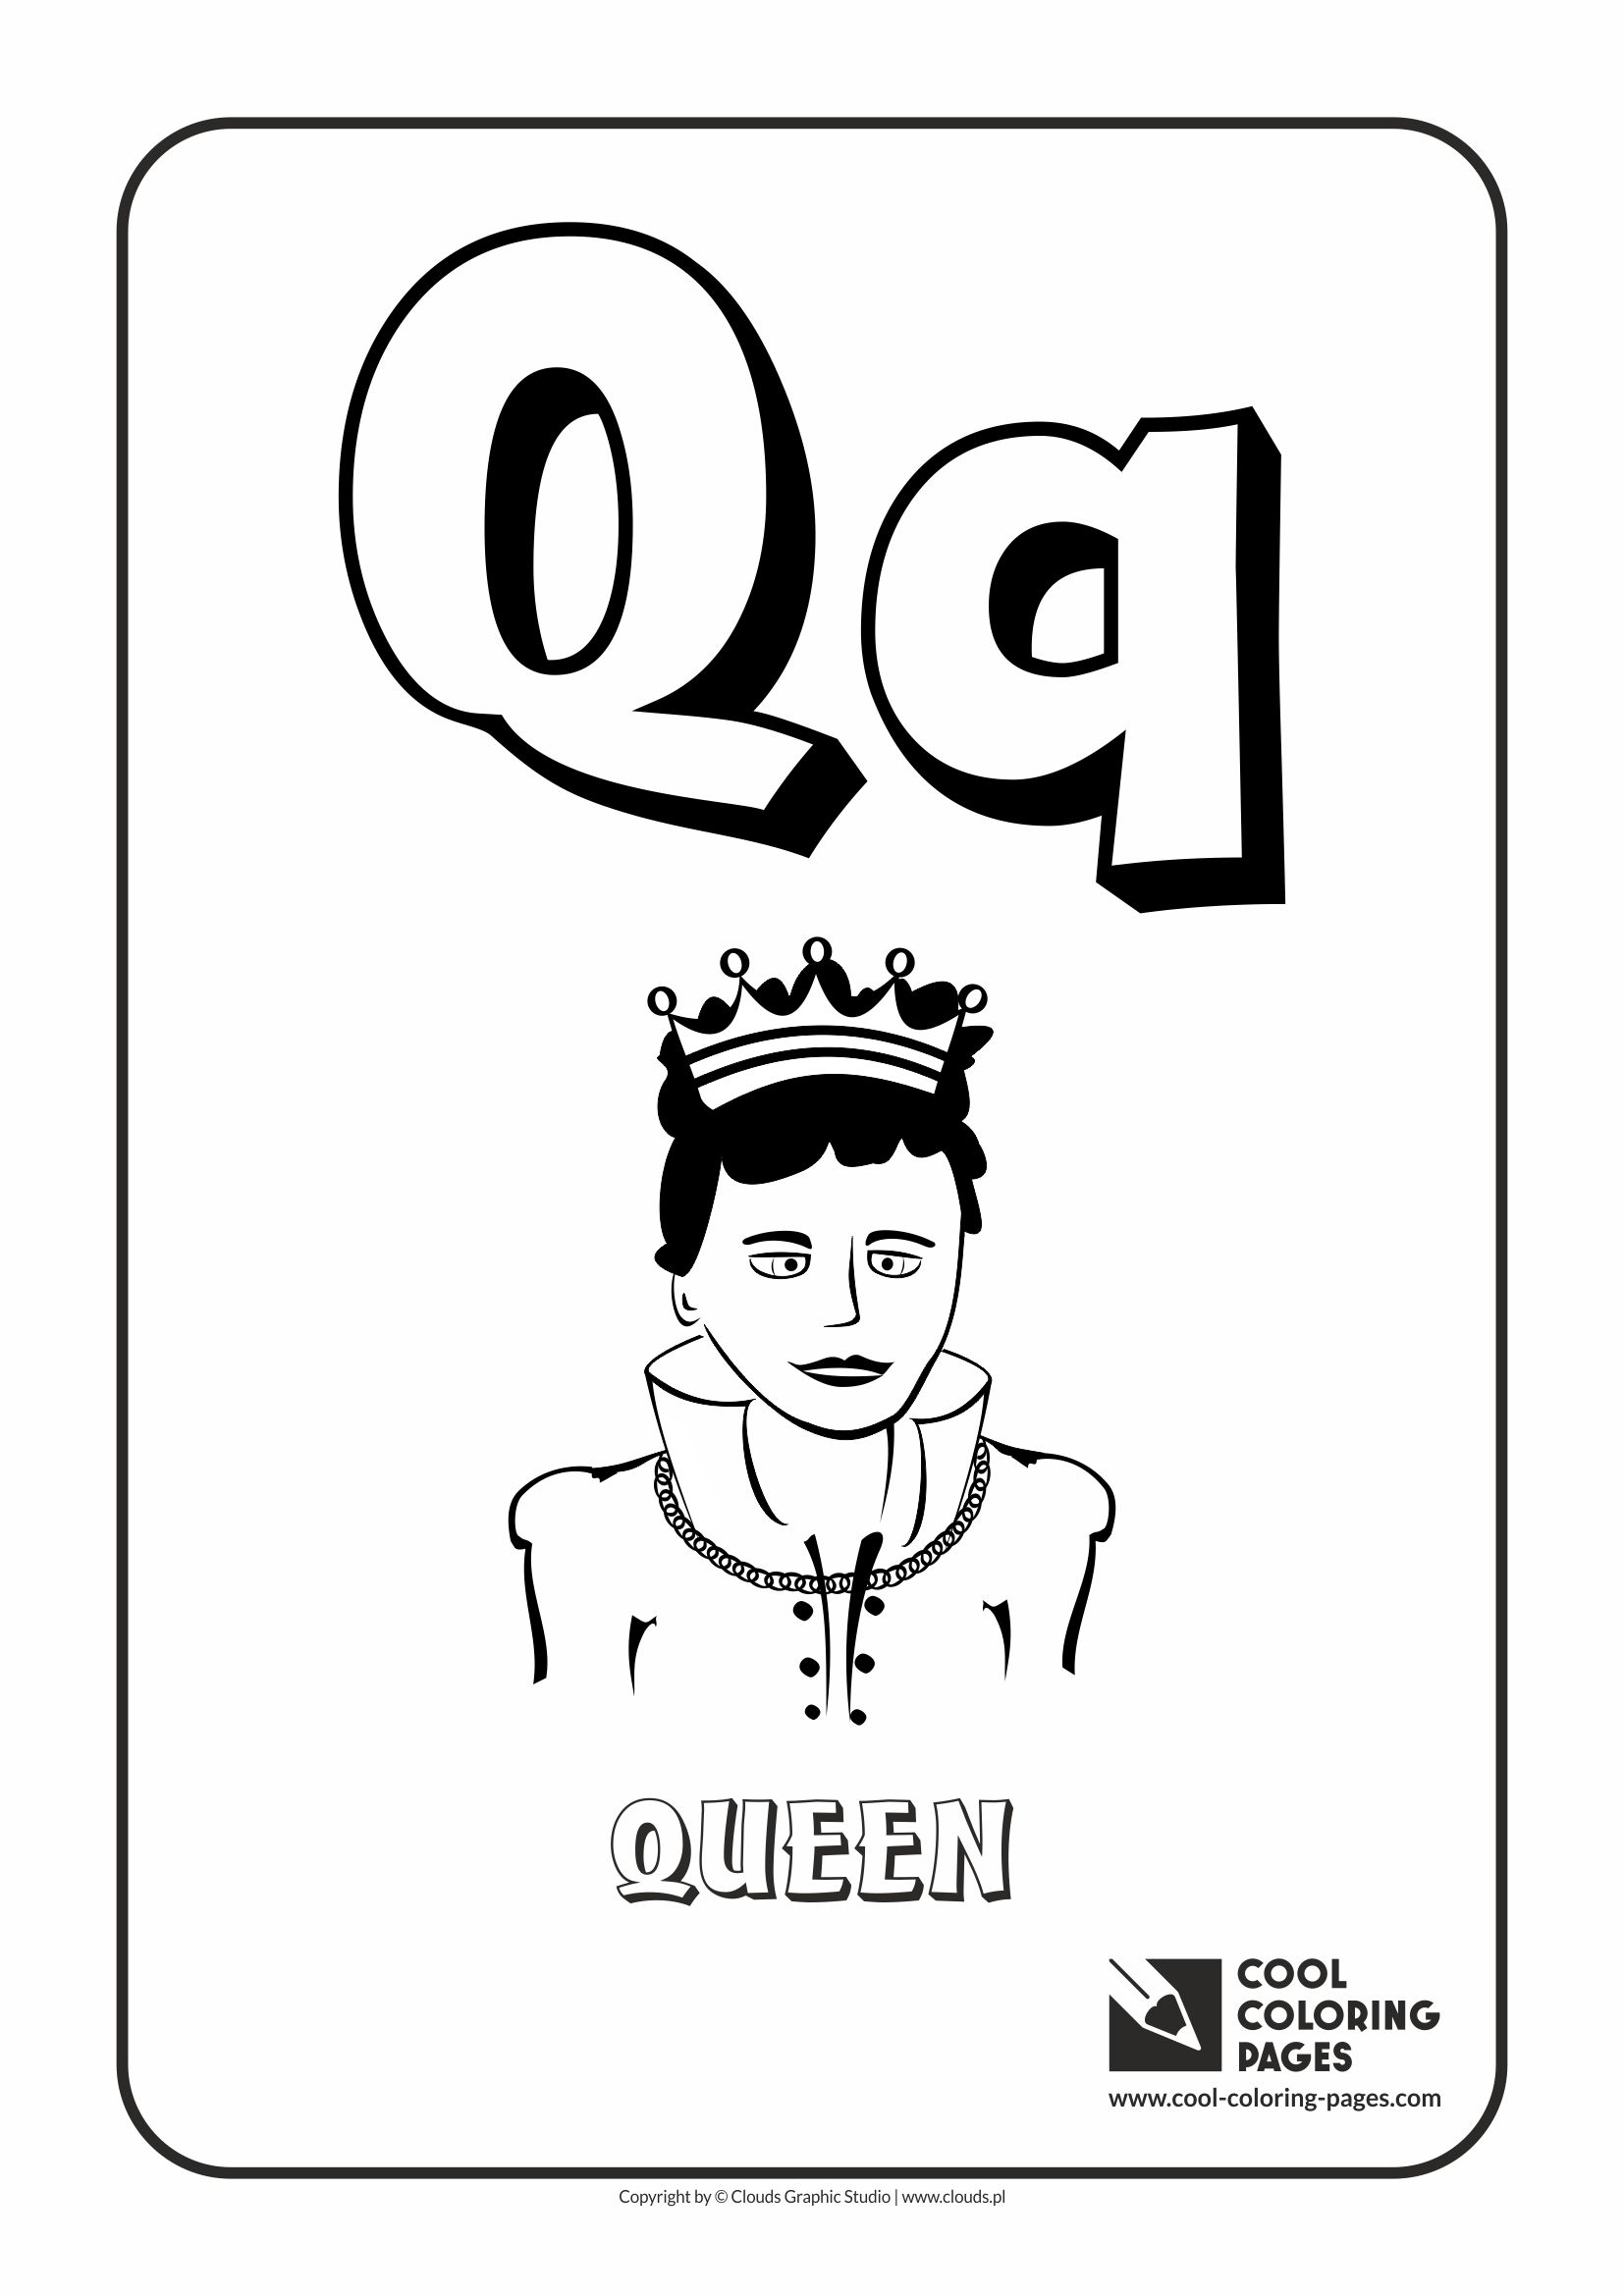 Cool Coloring Pages - Alphabet / Letter Q / Coloring page with letter Q